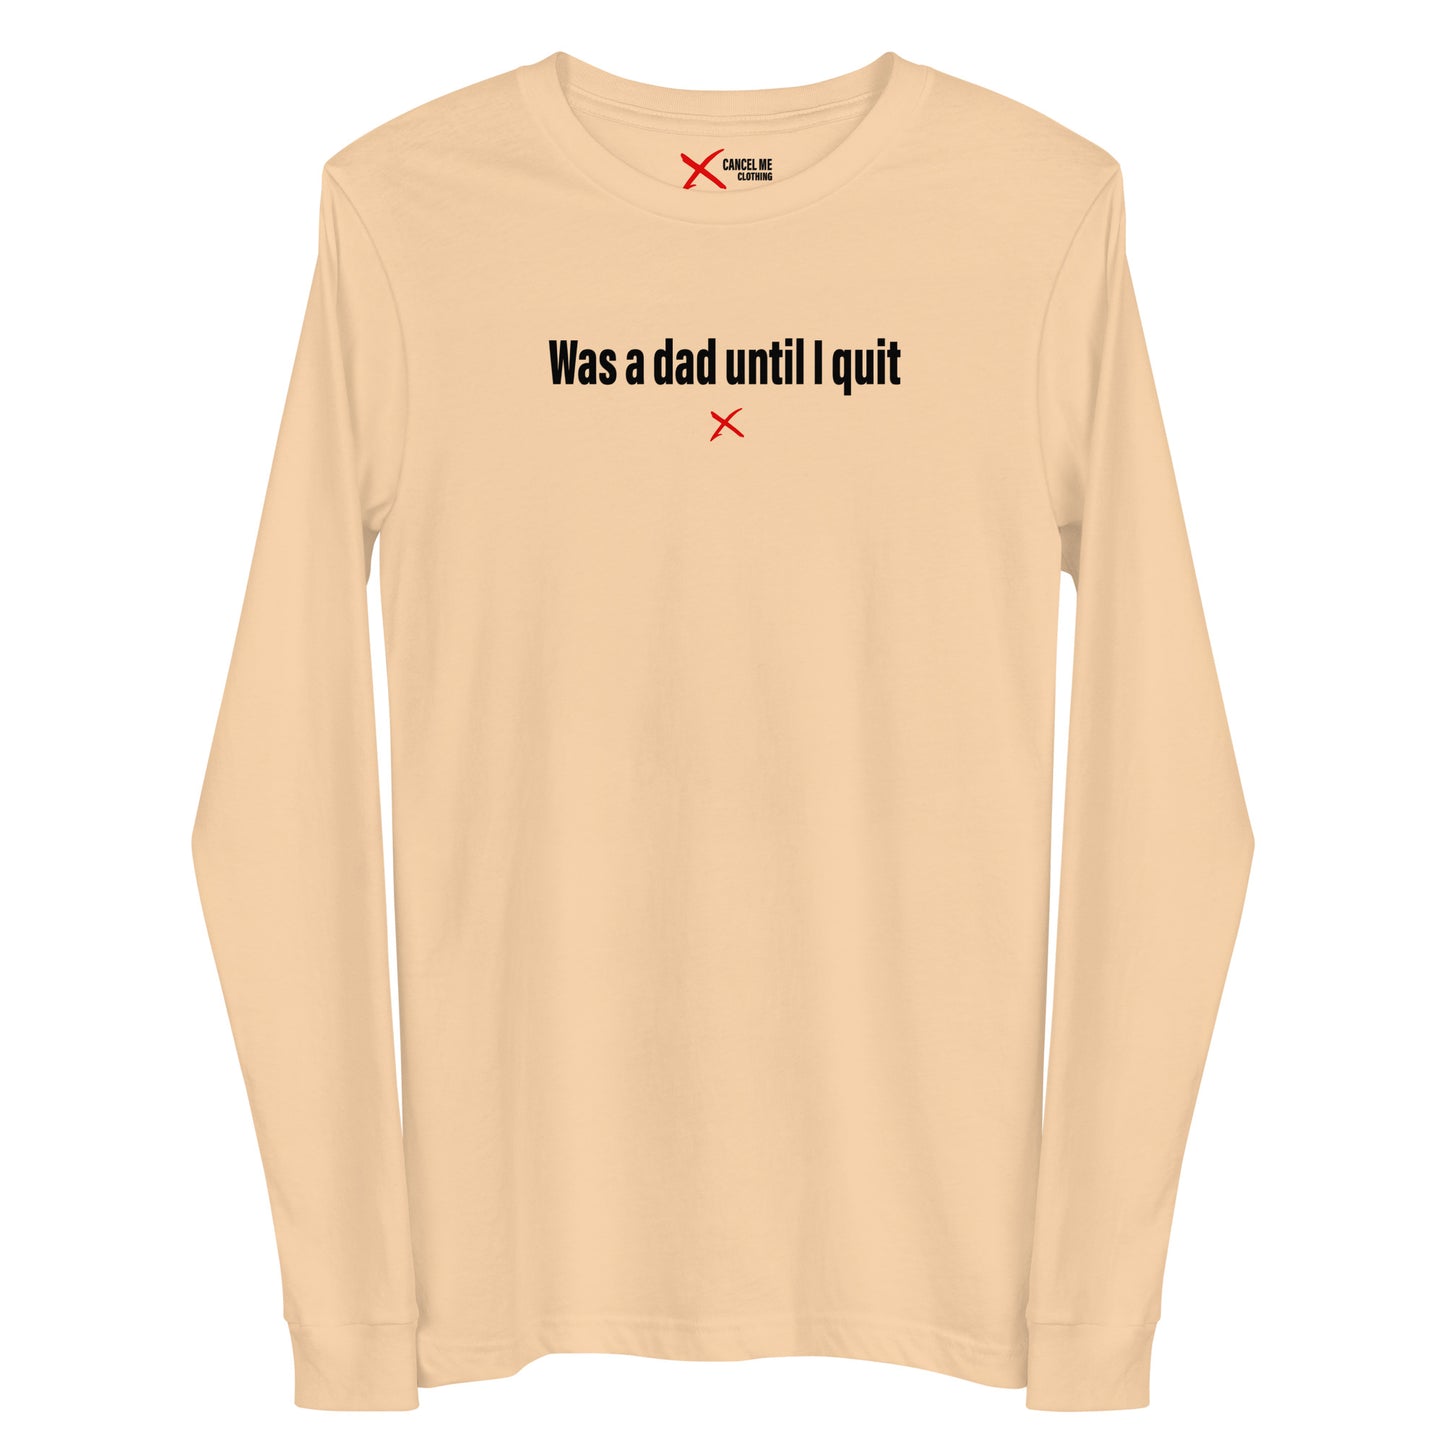 Was a dad until I quit - Longsleeve